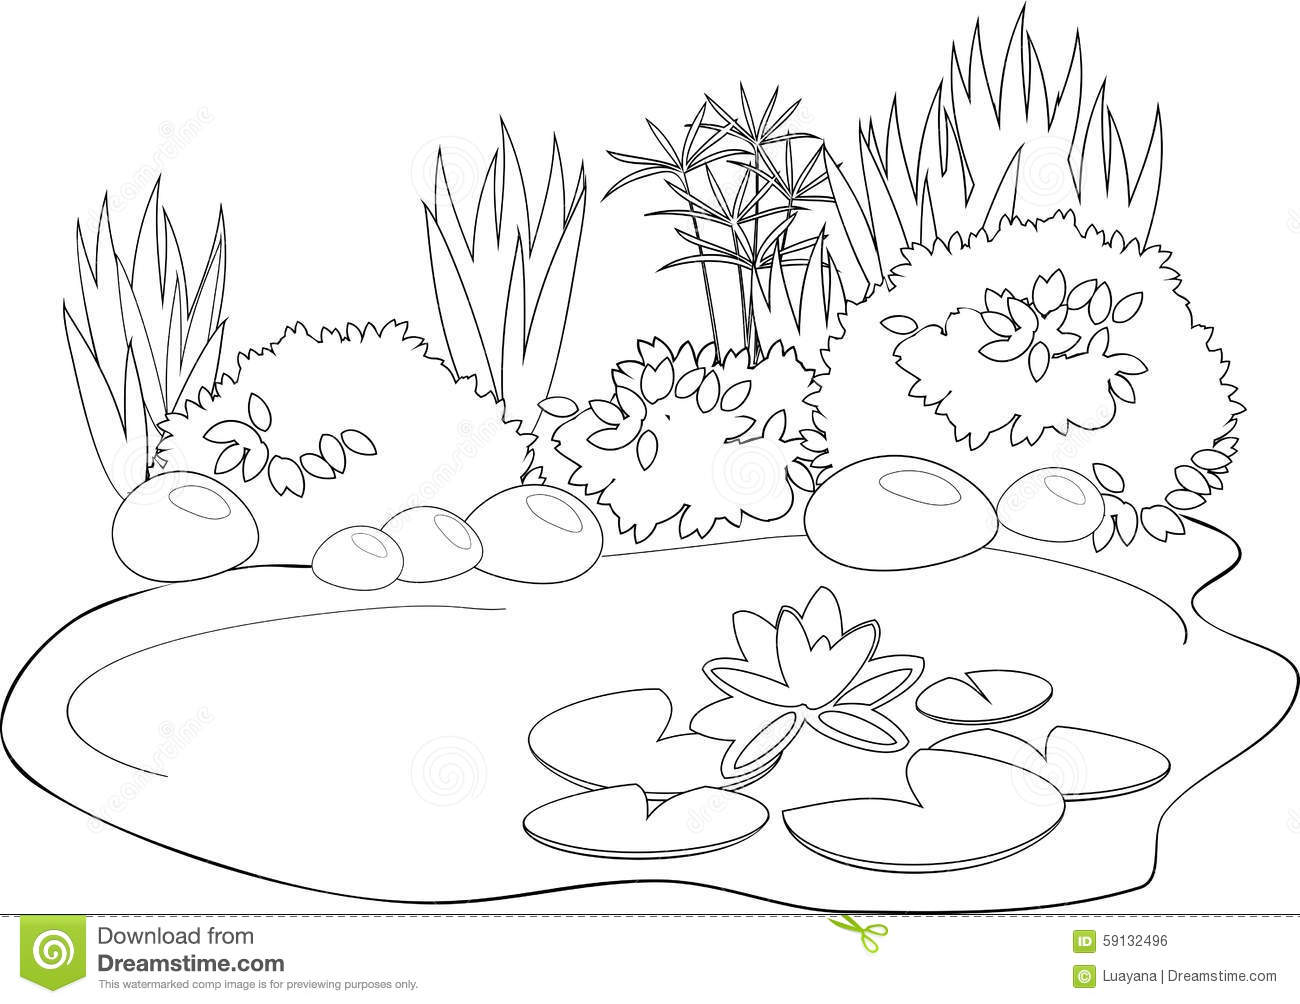 Pond Animals Coloring Pages at GetColorings.com | Free ... floral diagram of water lily 